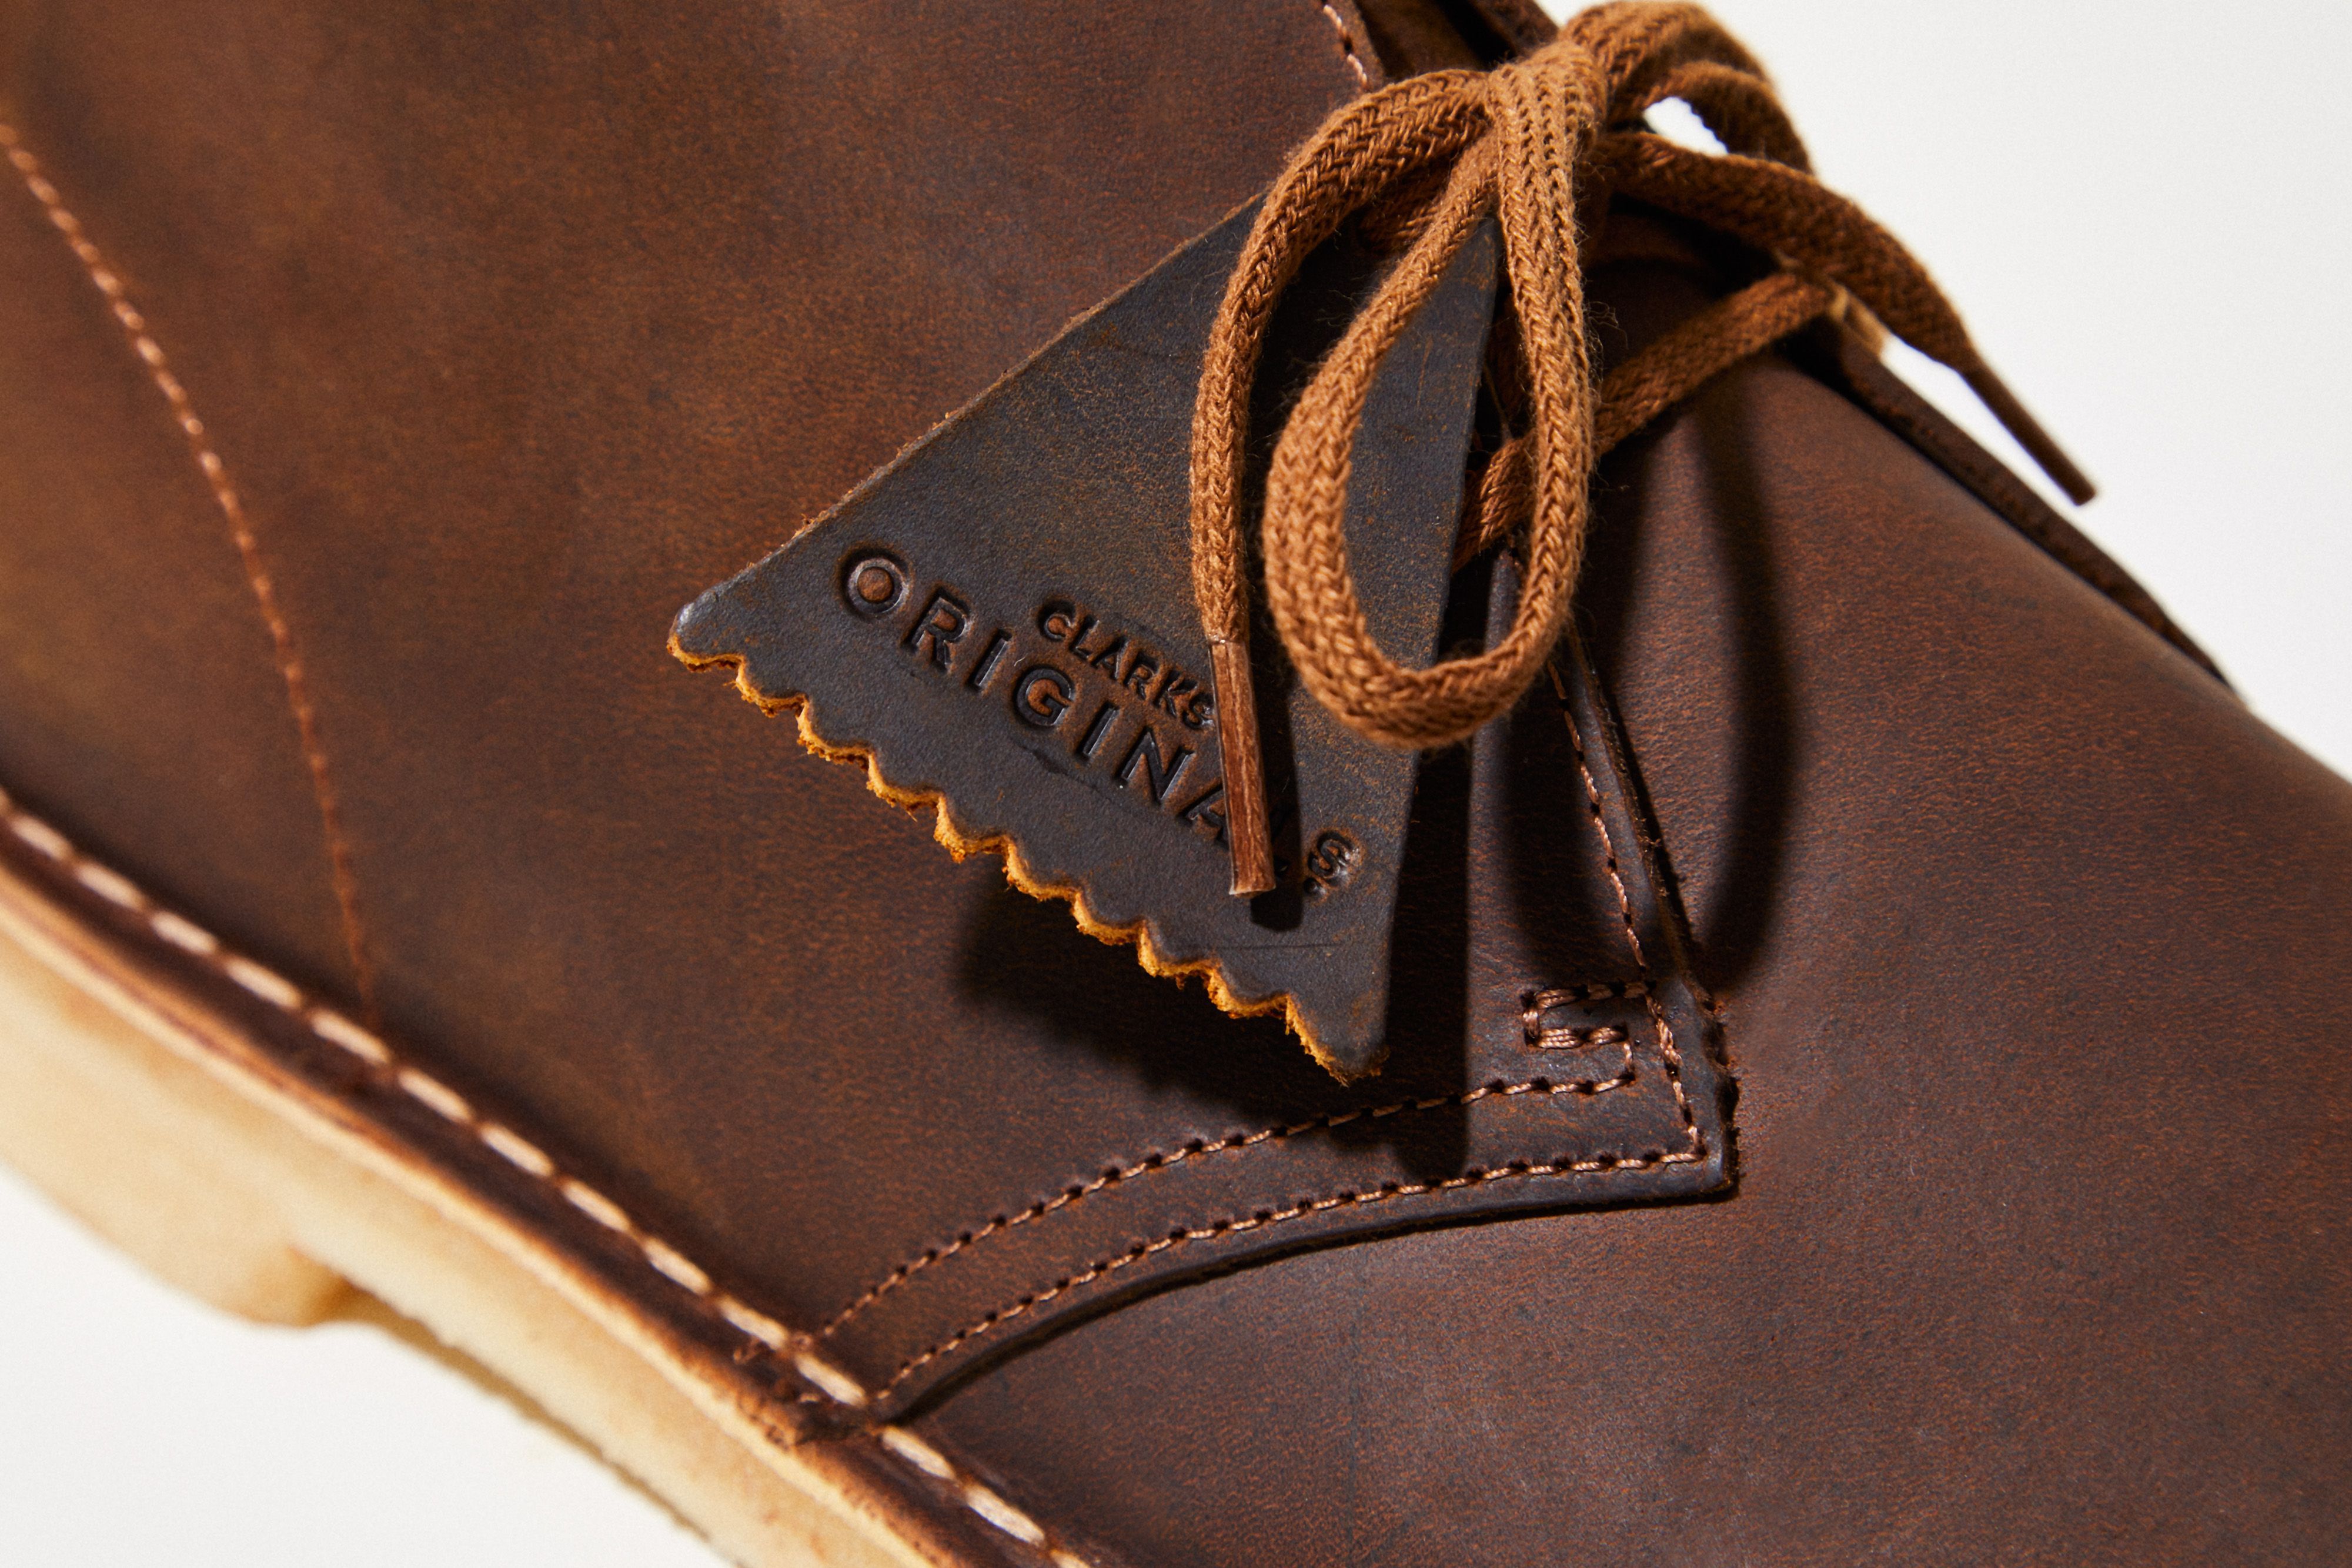 clarks chukka boots review